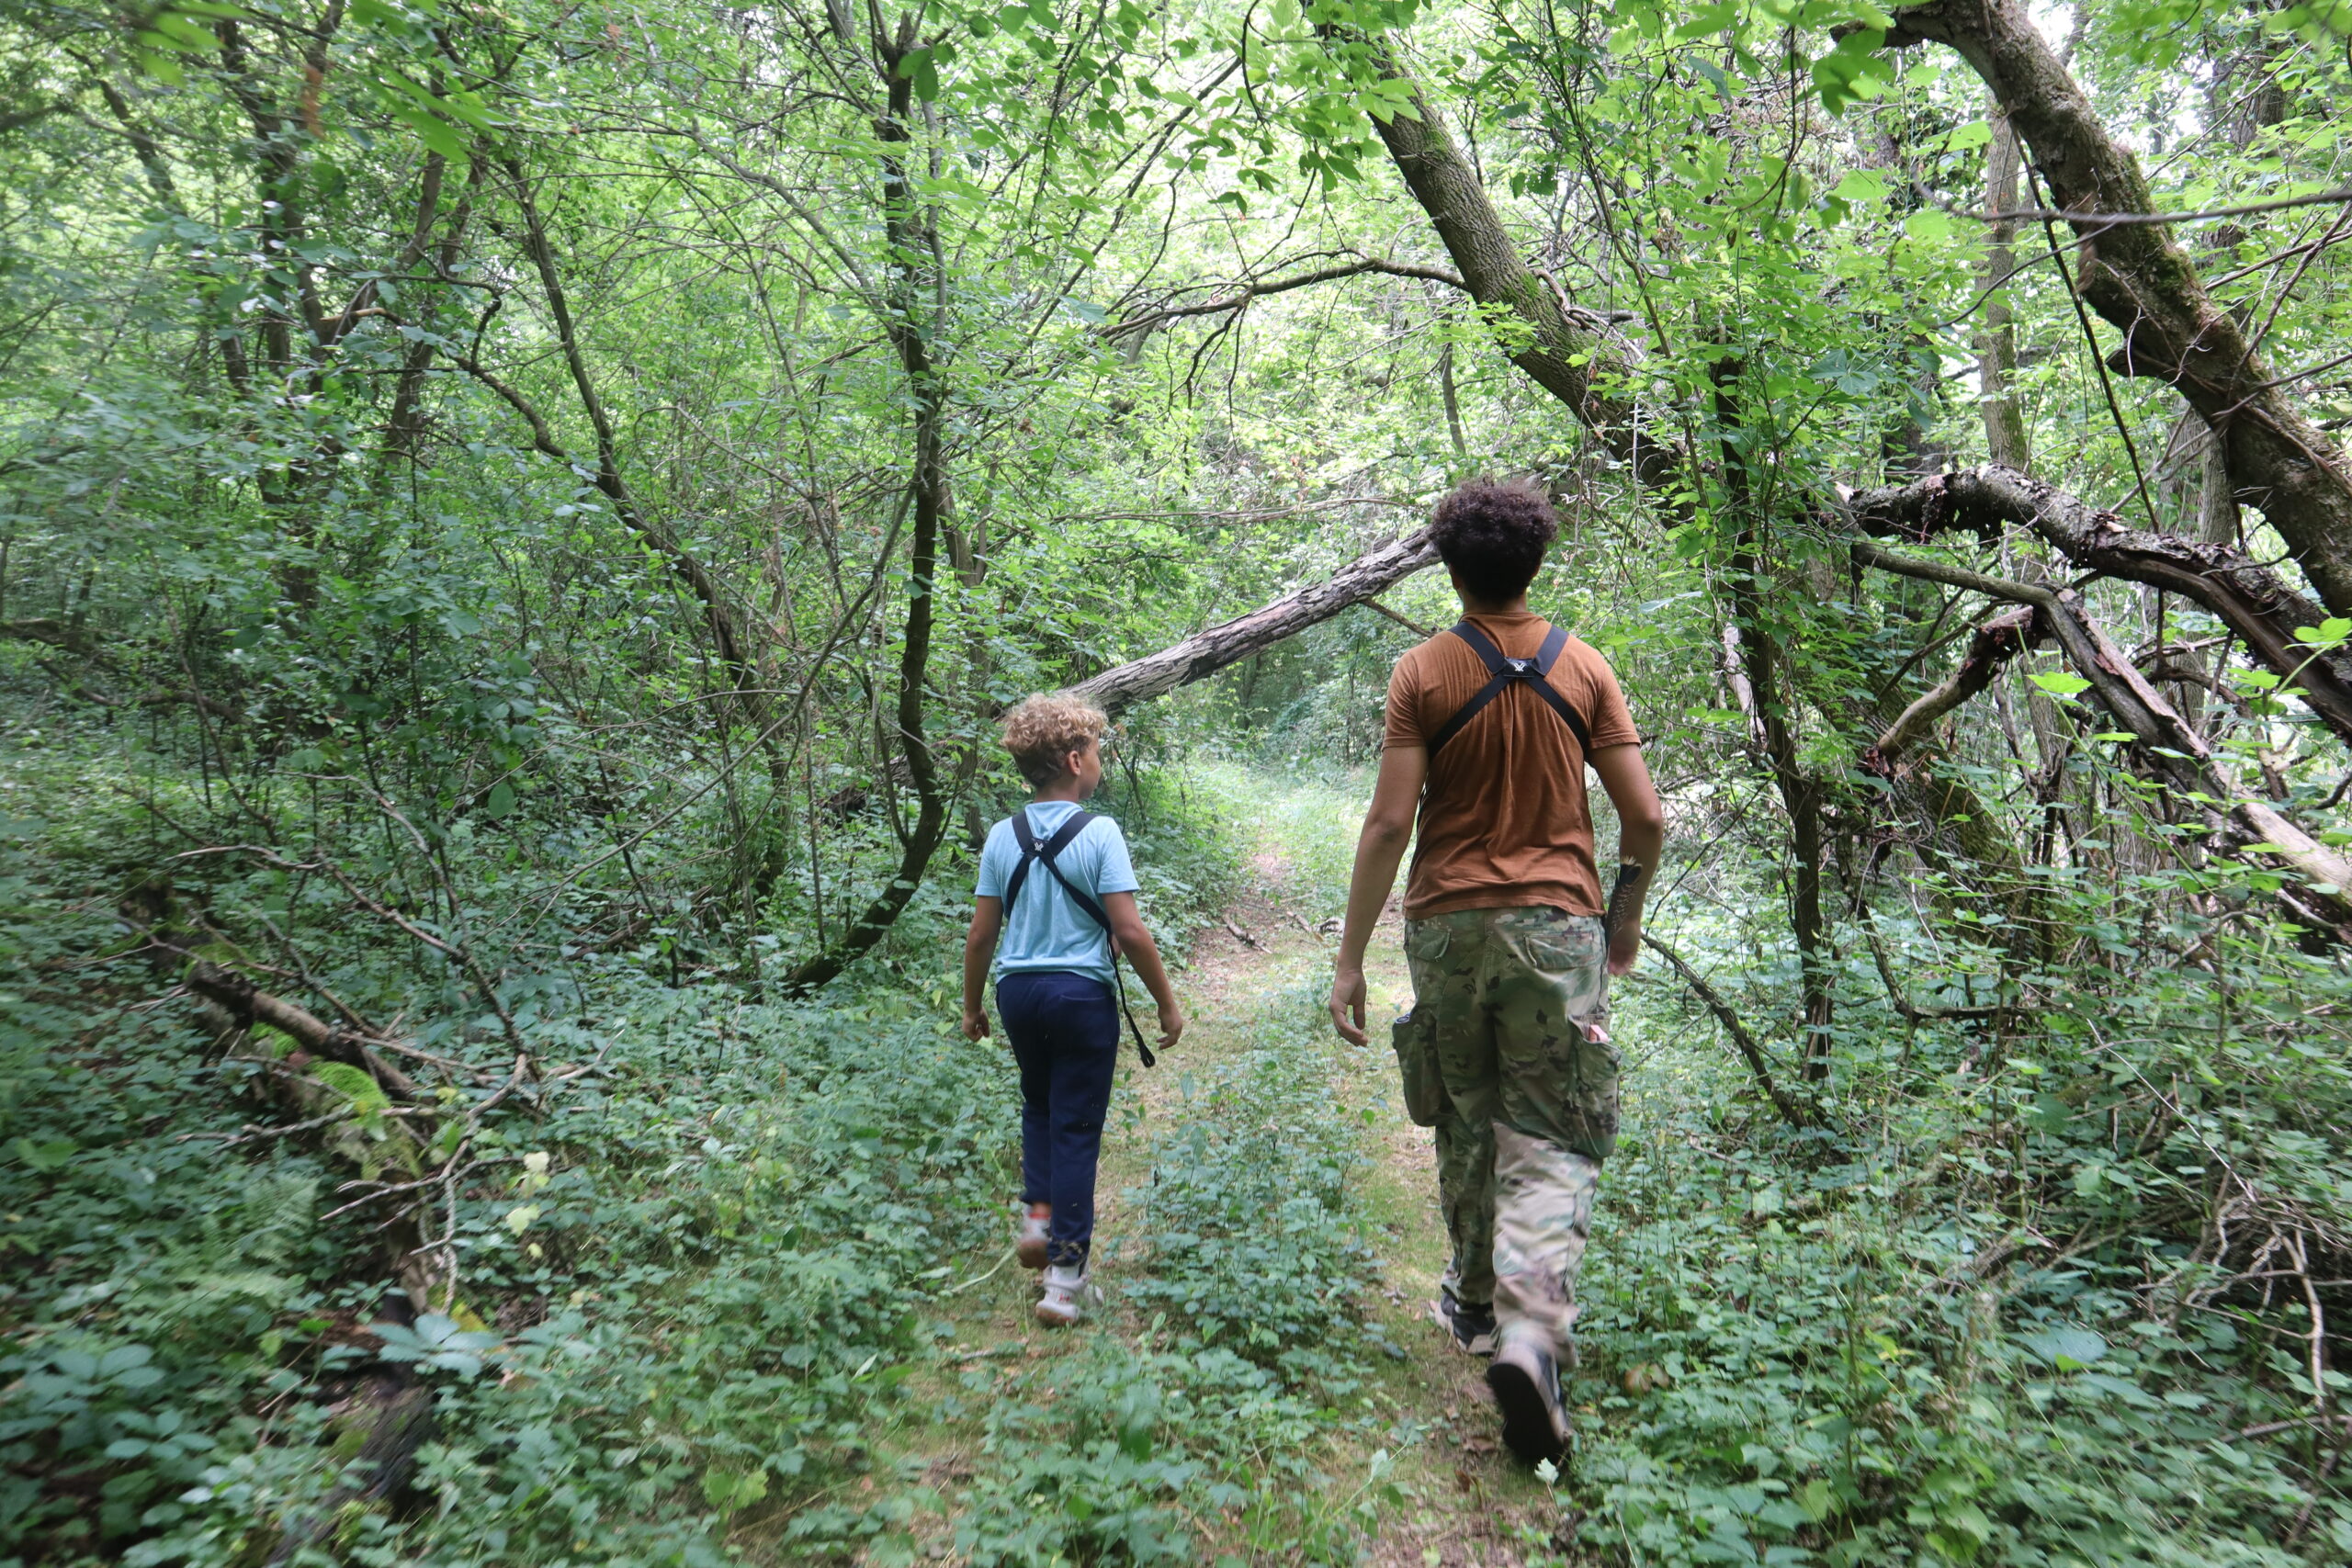 Two children walking on a hiking trail through the forest